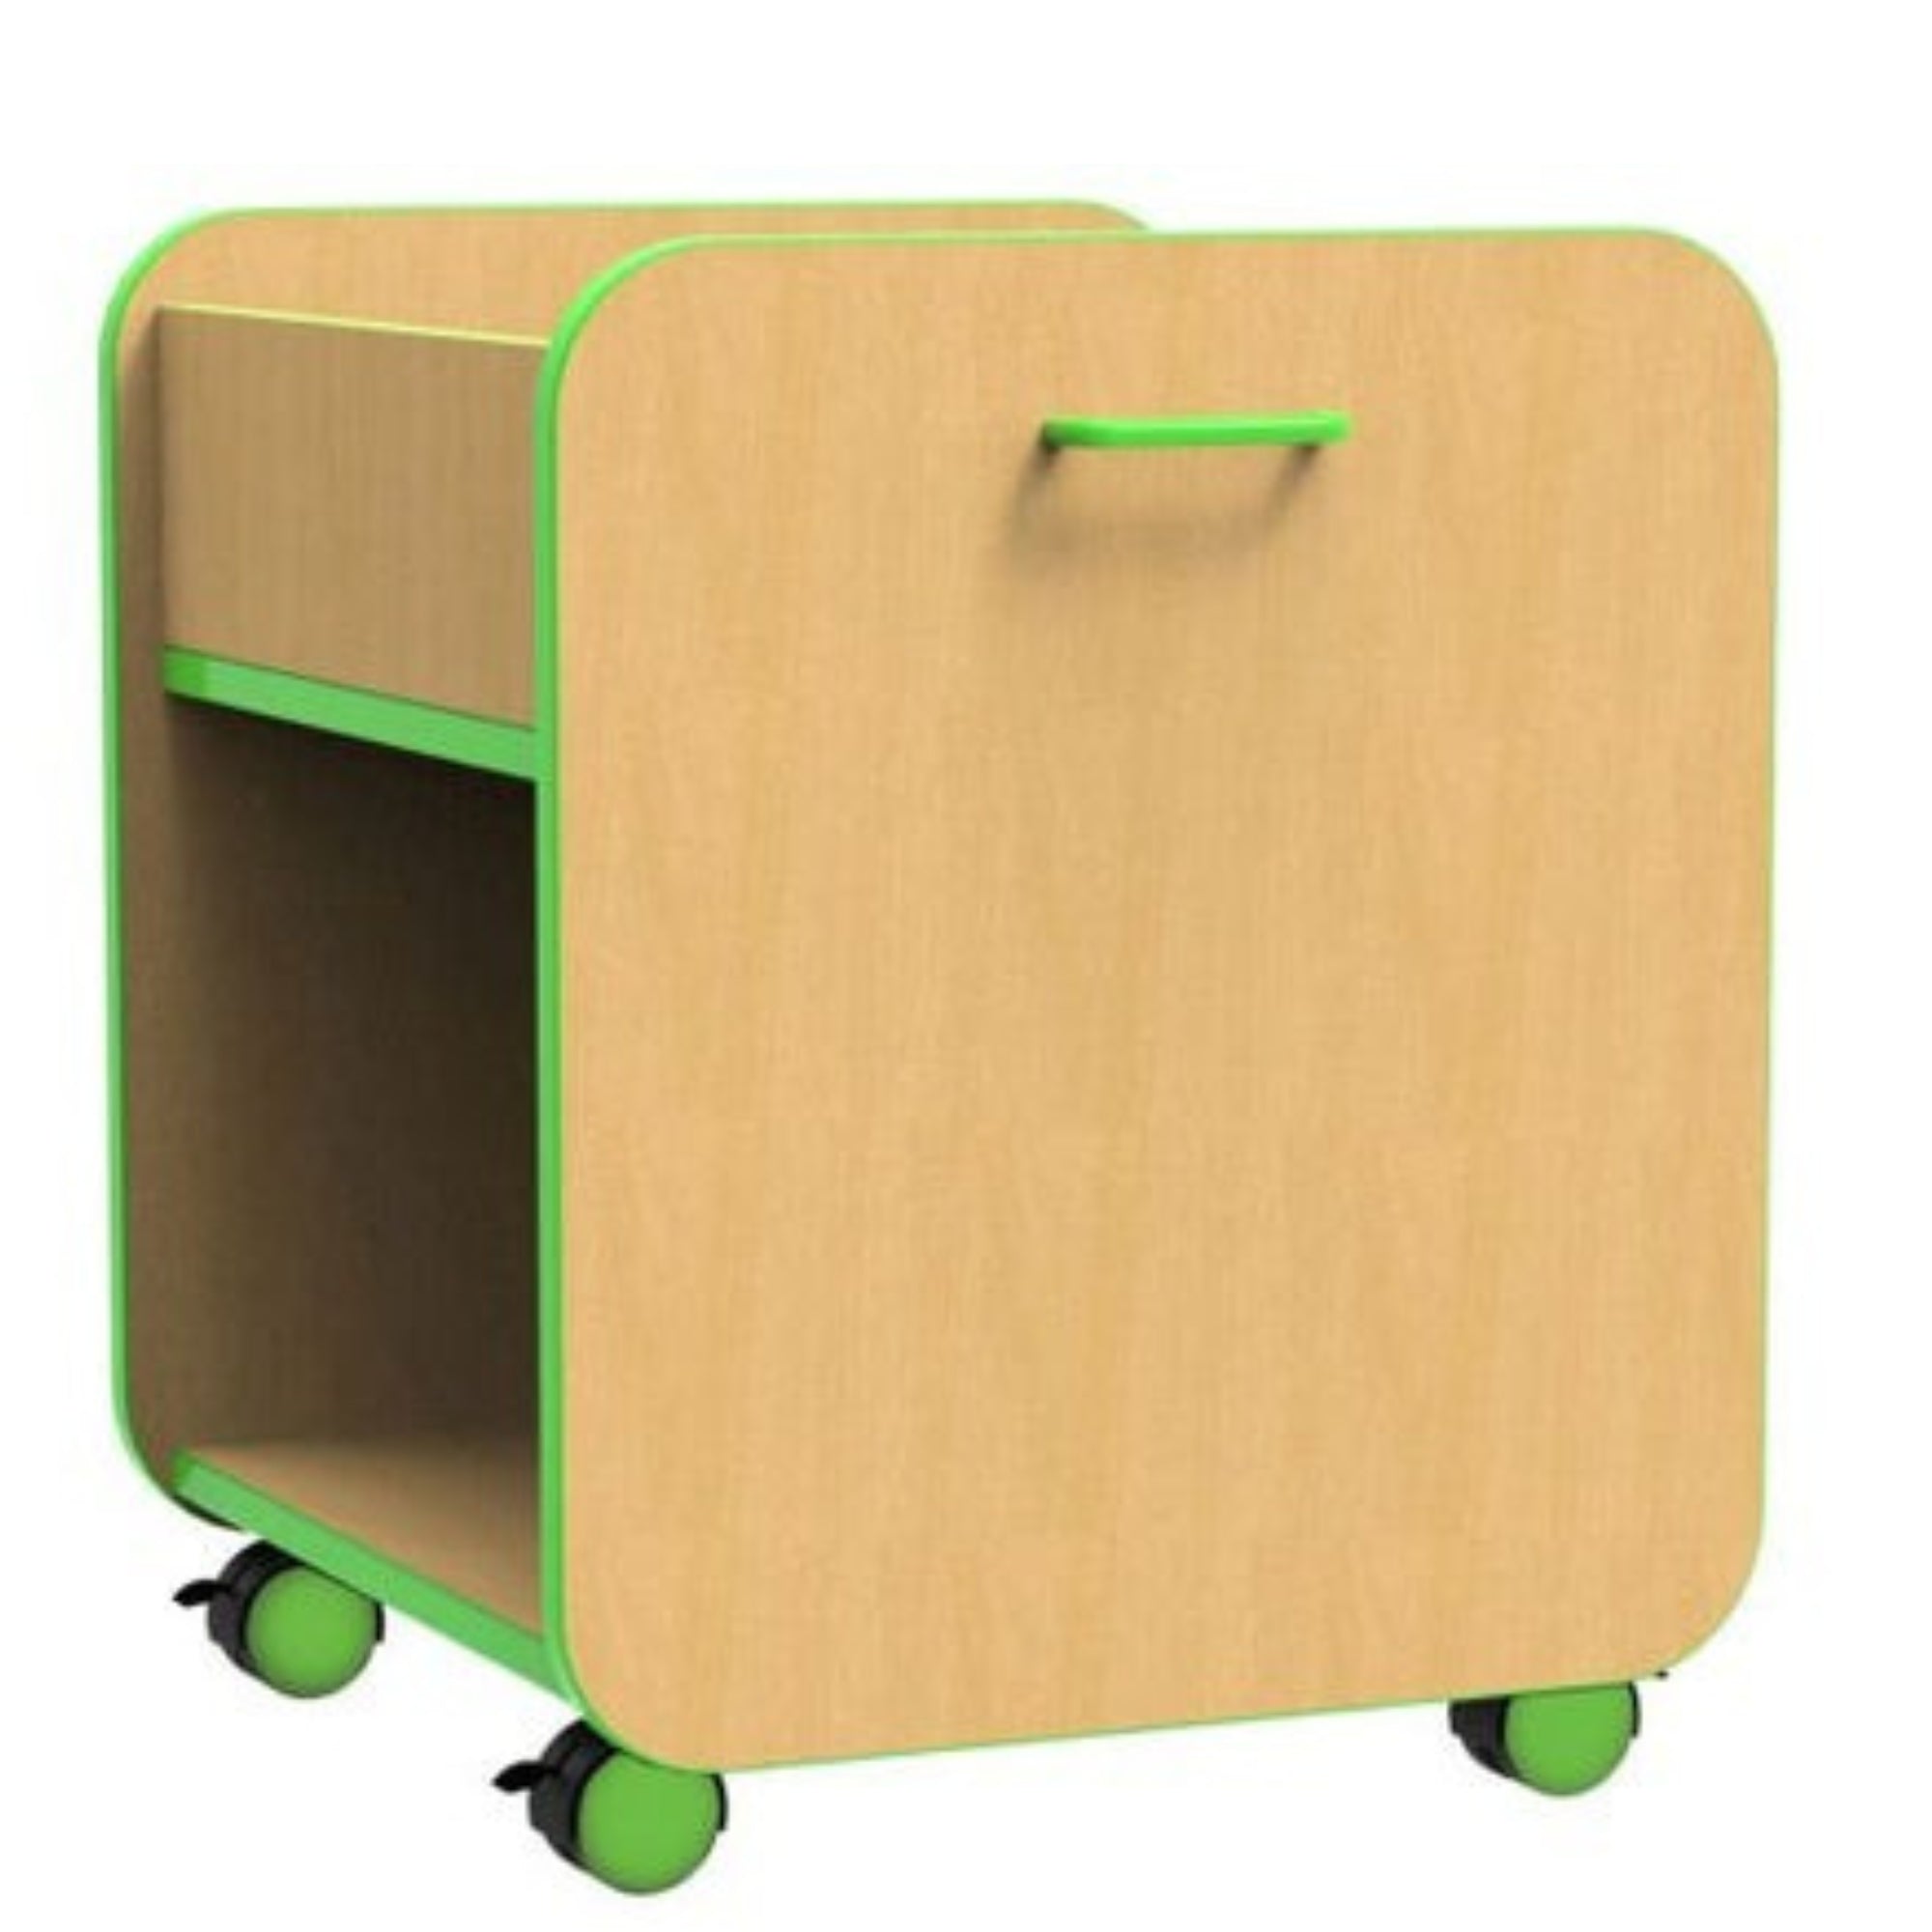 Beam Single Pull Out Storage Unit, The Beam Single Pull Out Storage Unit is an excellent addition to any educational environment. This single pull-out browser unit is versatile and can be used as a stand-alone unit or with docking stations. Manufactured in the UK using high-quality 18mm MFC, this storage unit is built to last. The top section of the unit provides ample storage space, while the shelf below offers additional storage and organization. With colour co-ordinated chunky handles and castors, this u